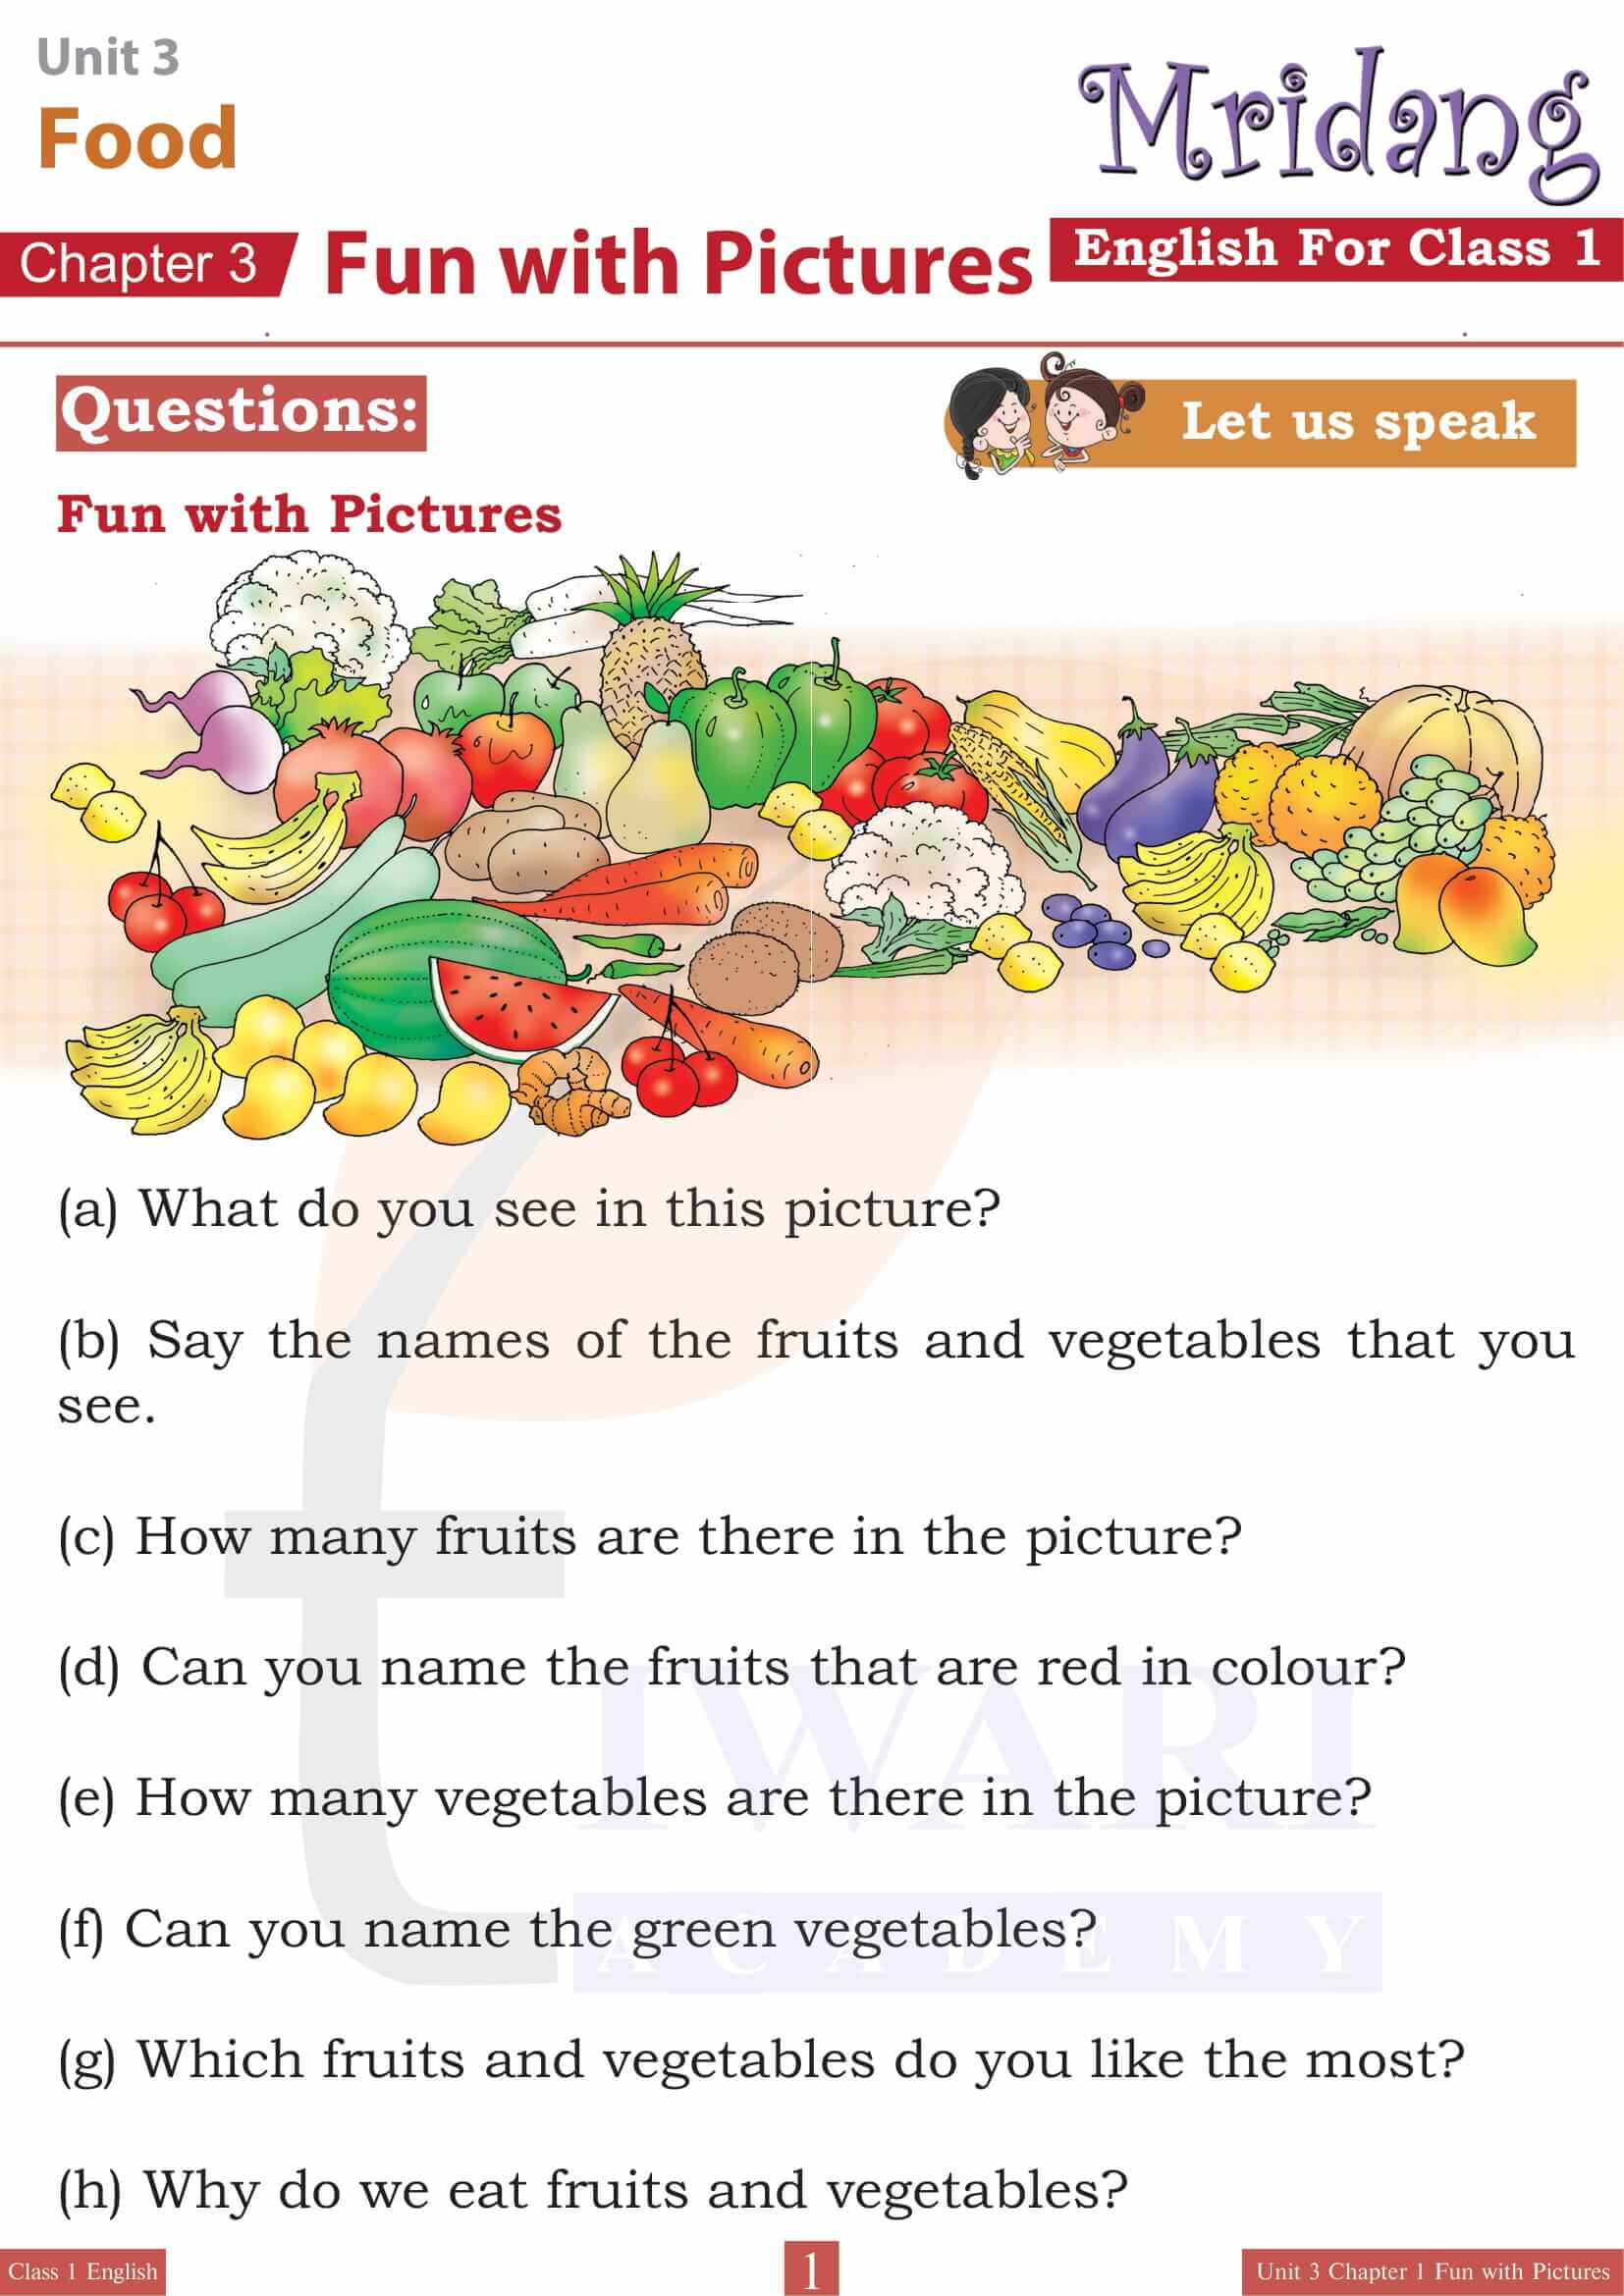 NCERT Solutions for Class 1 English Mridang Unit 3 Food Chapter 1 Fun with Pictures Question Answers